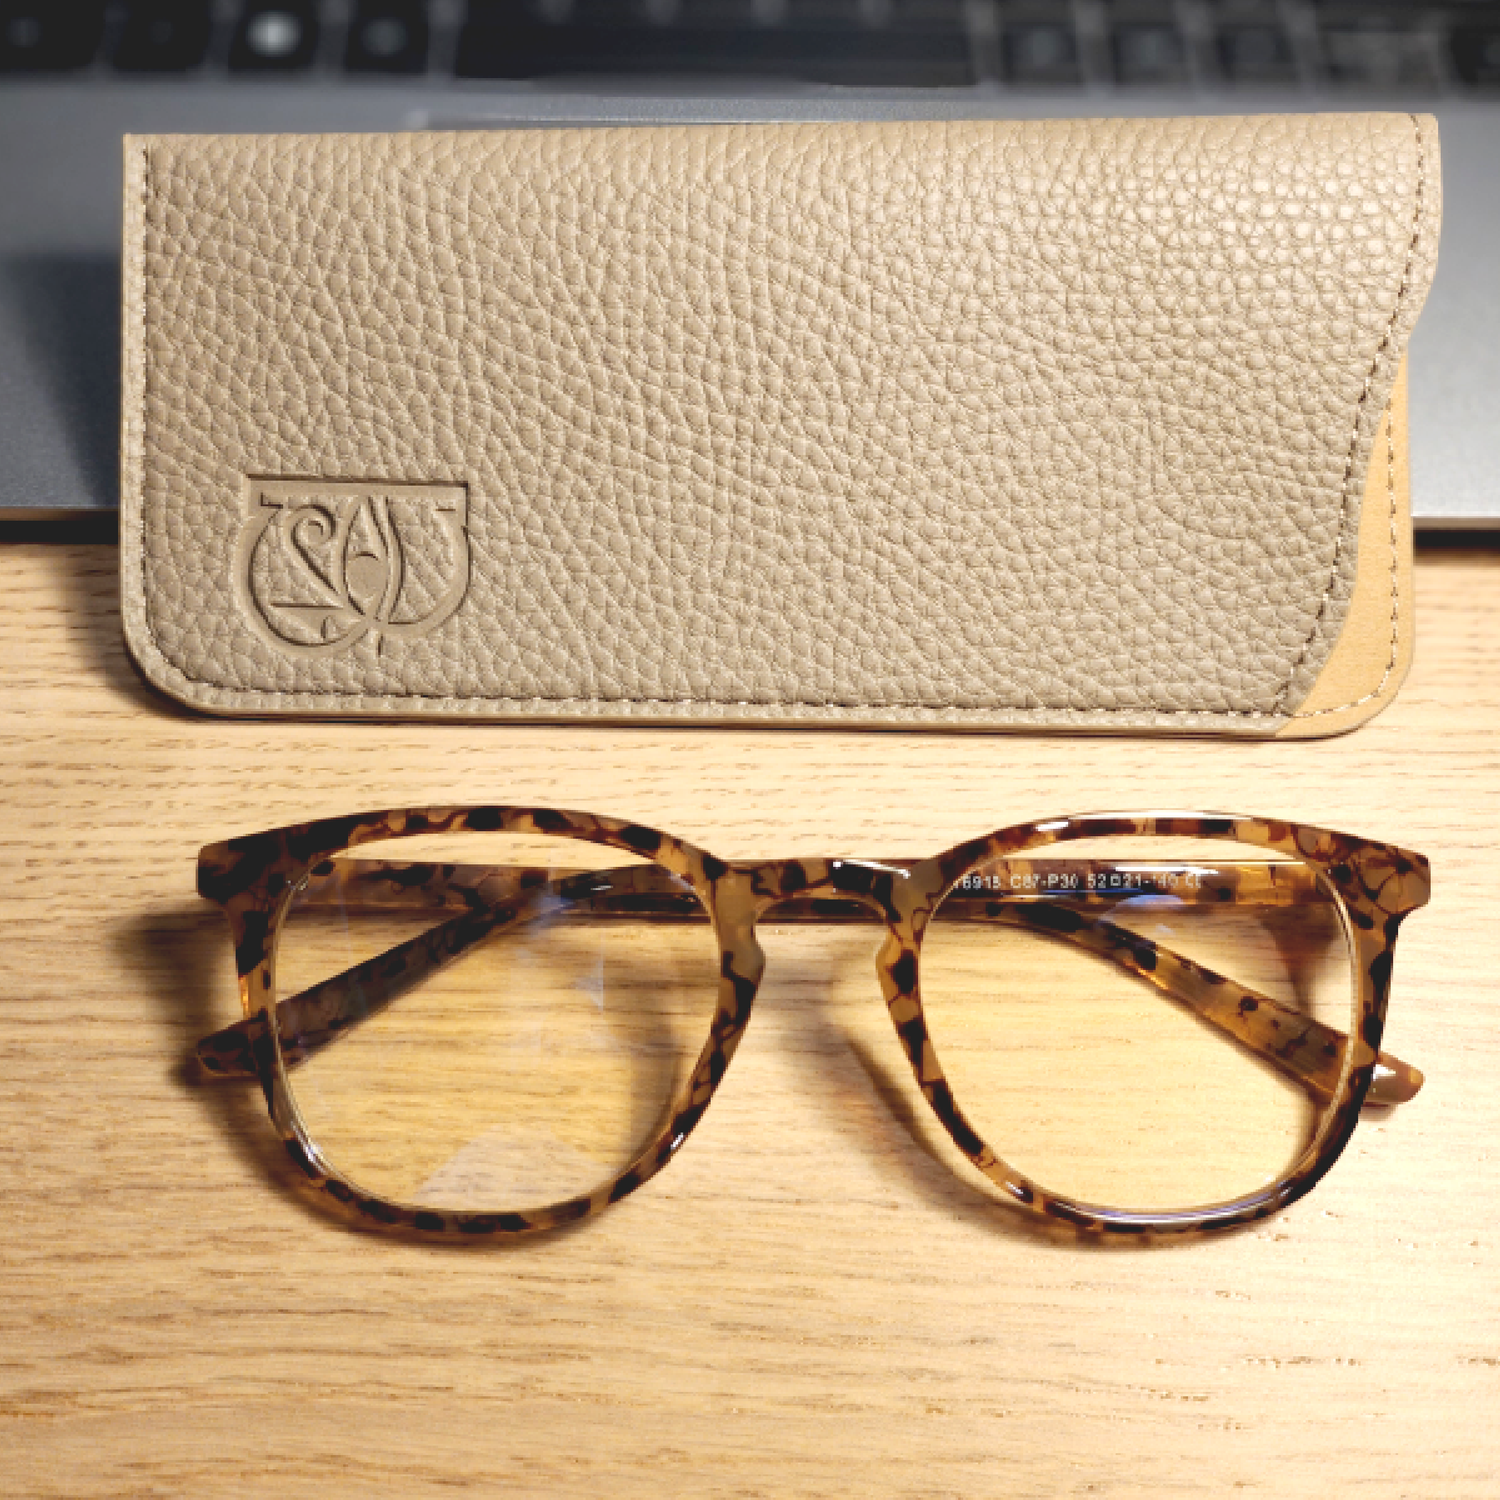 Bprotectedstore_Cai_Light_Tortoise_Computer_Glasses_-_Stylish_Comfort_for_Work_and_Play-LifeStyle